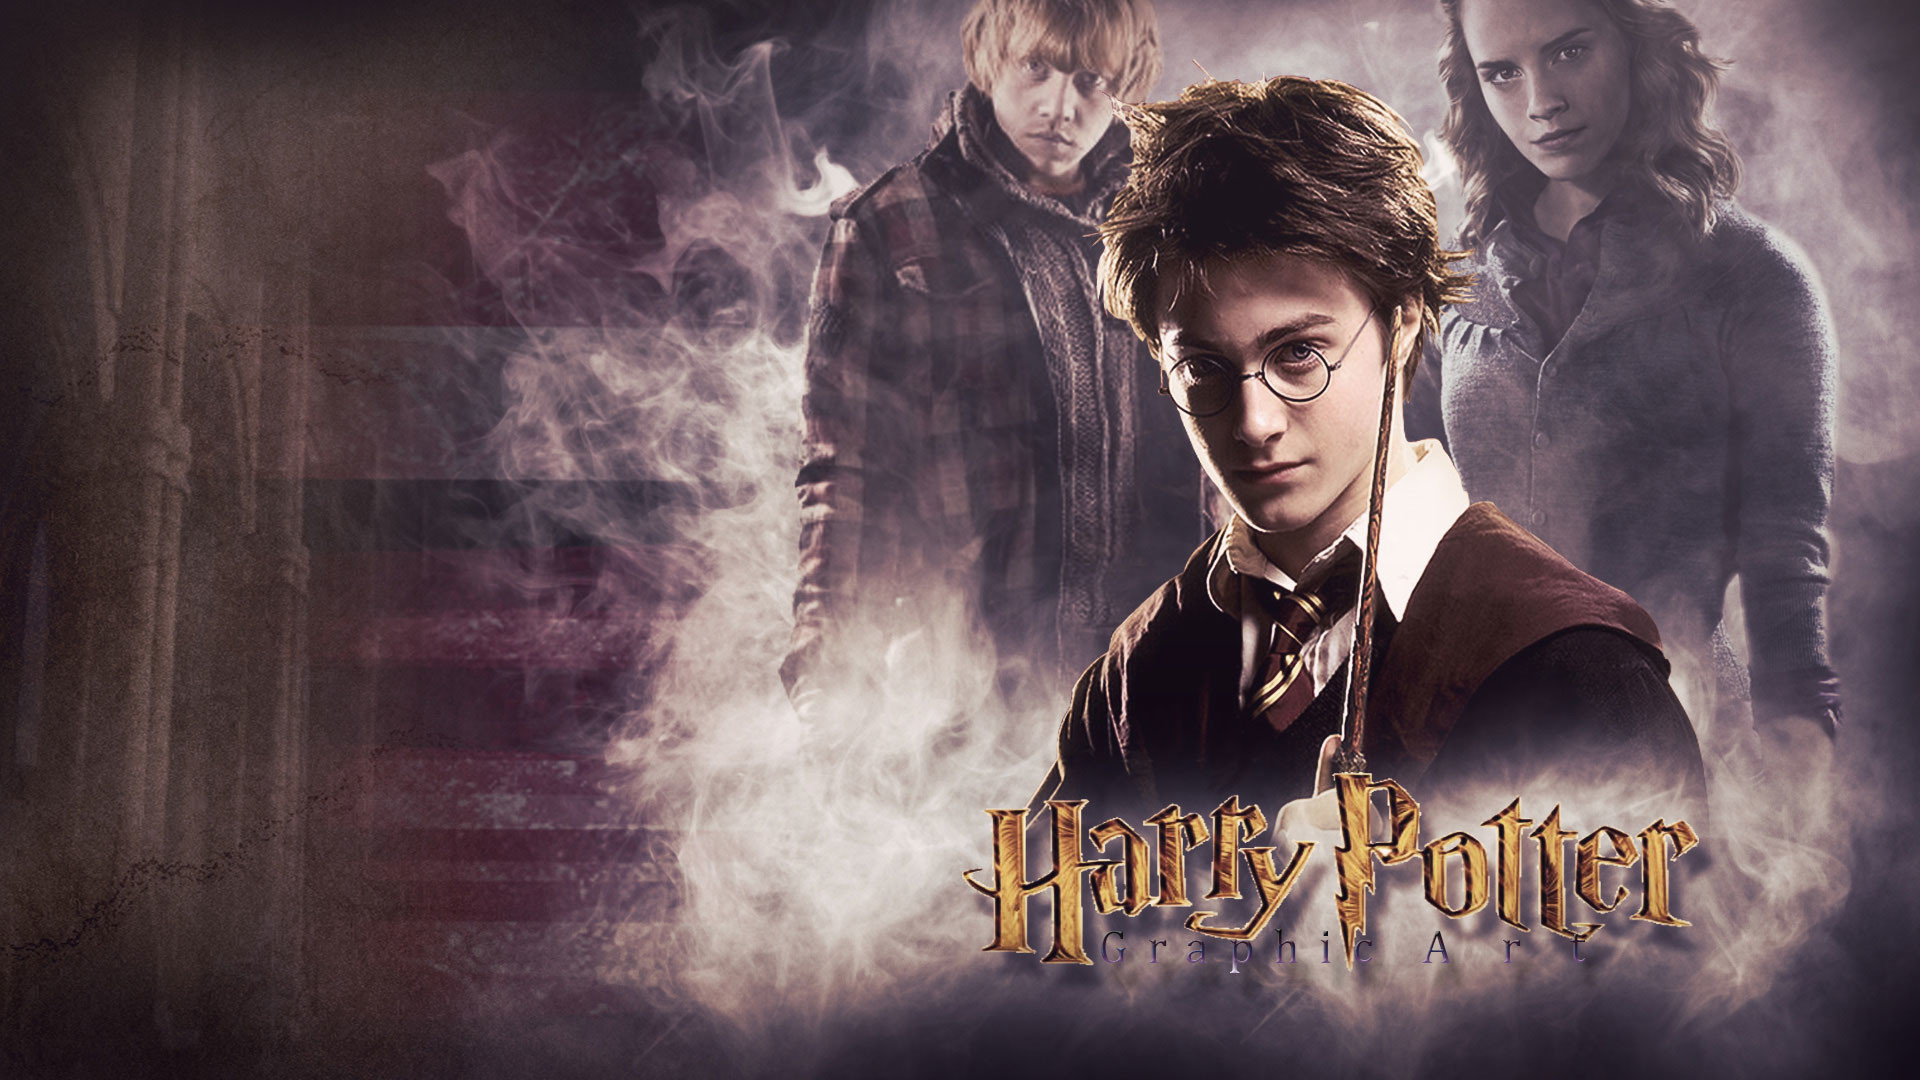 Harry potter amazing hd wallpapers high resolution all hd